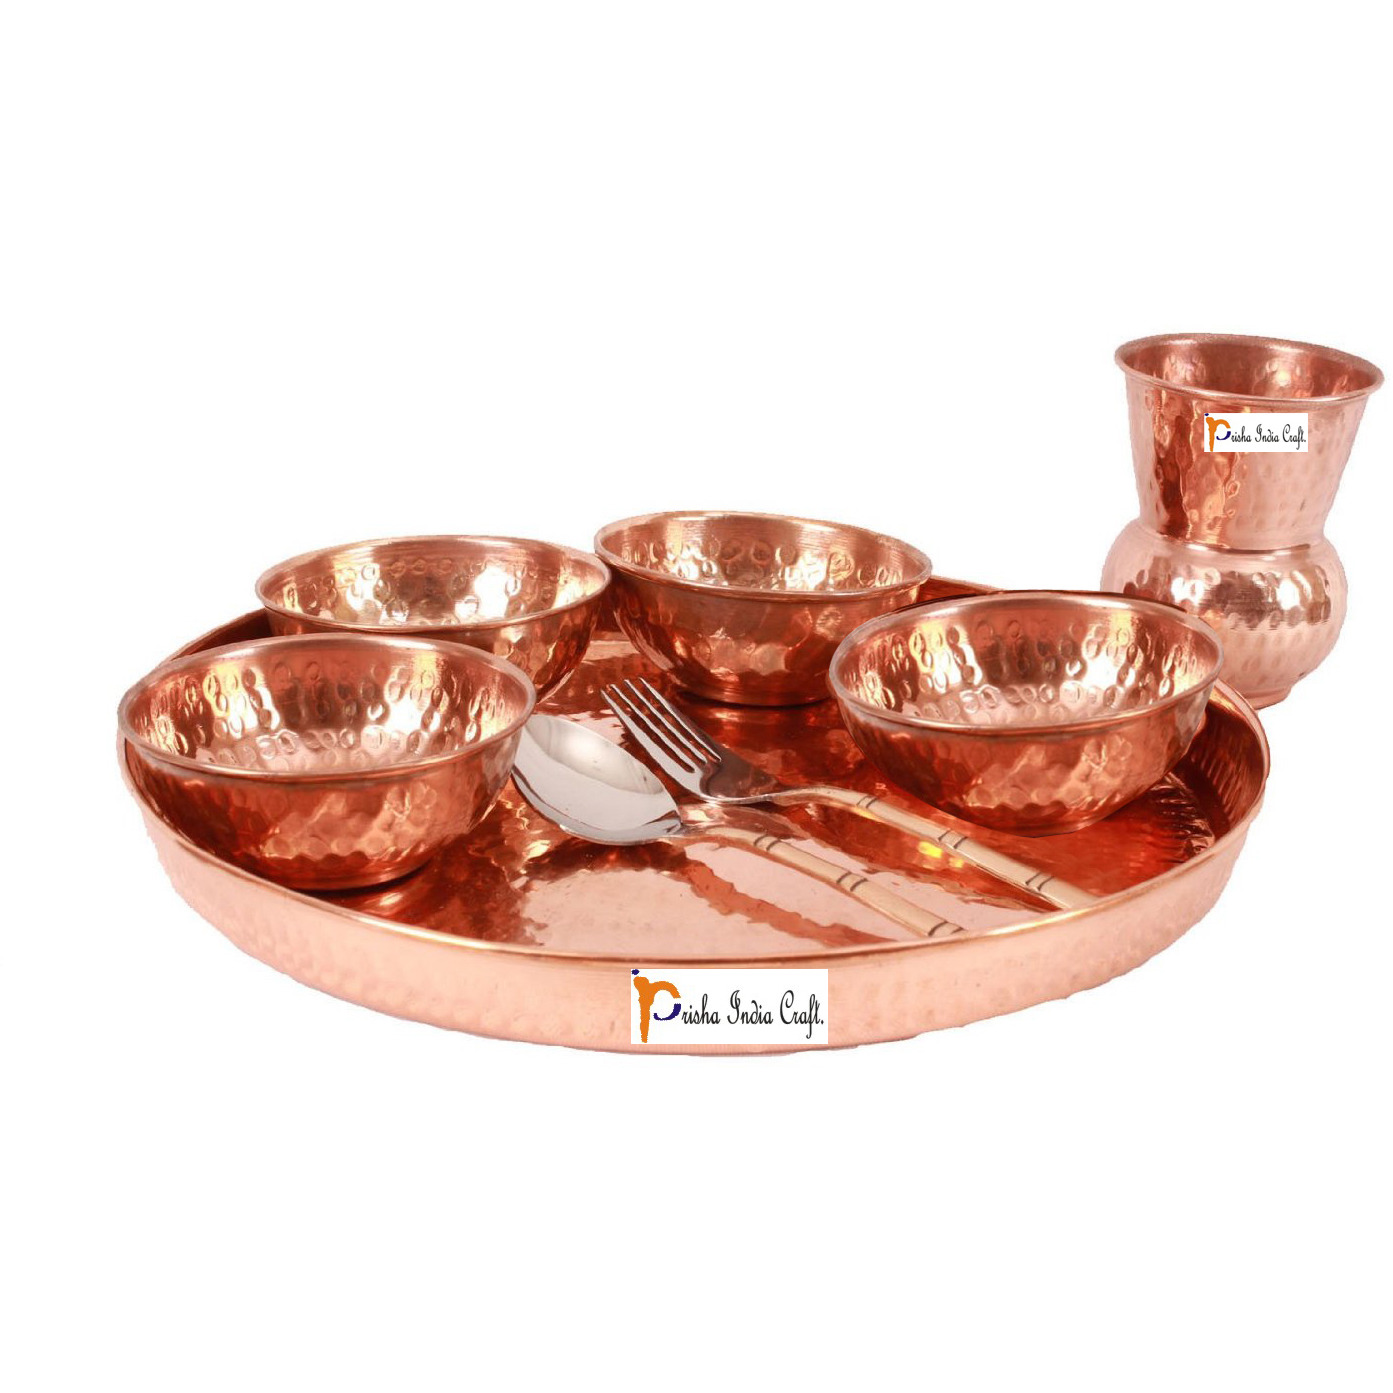 Prisha India Craft B. Set of 6 Dinnerware Traditional 100% Pure Copper Dinner Set of Thali Plate, Bowls, Glass and Spoon, Dia 12  With 1 Stainless Steel Copper Pitcher Jug - Christmas Gift